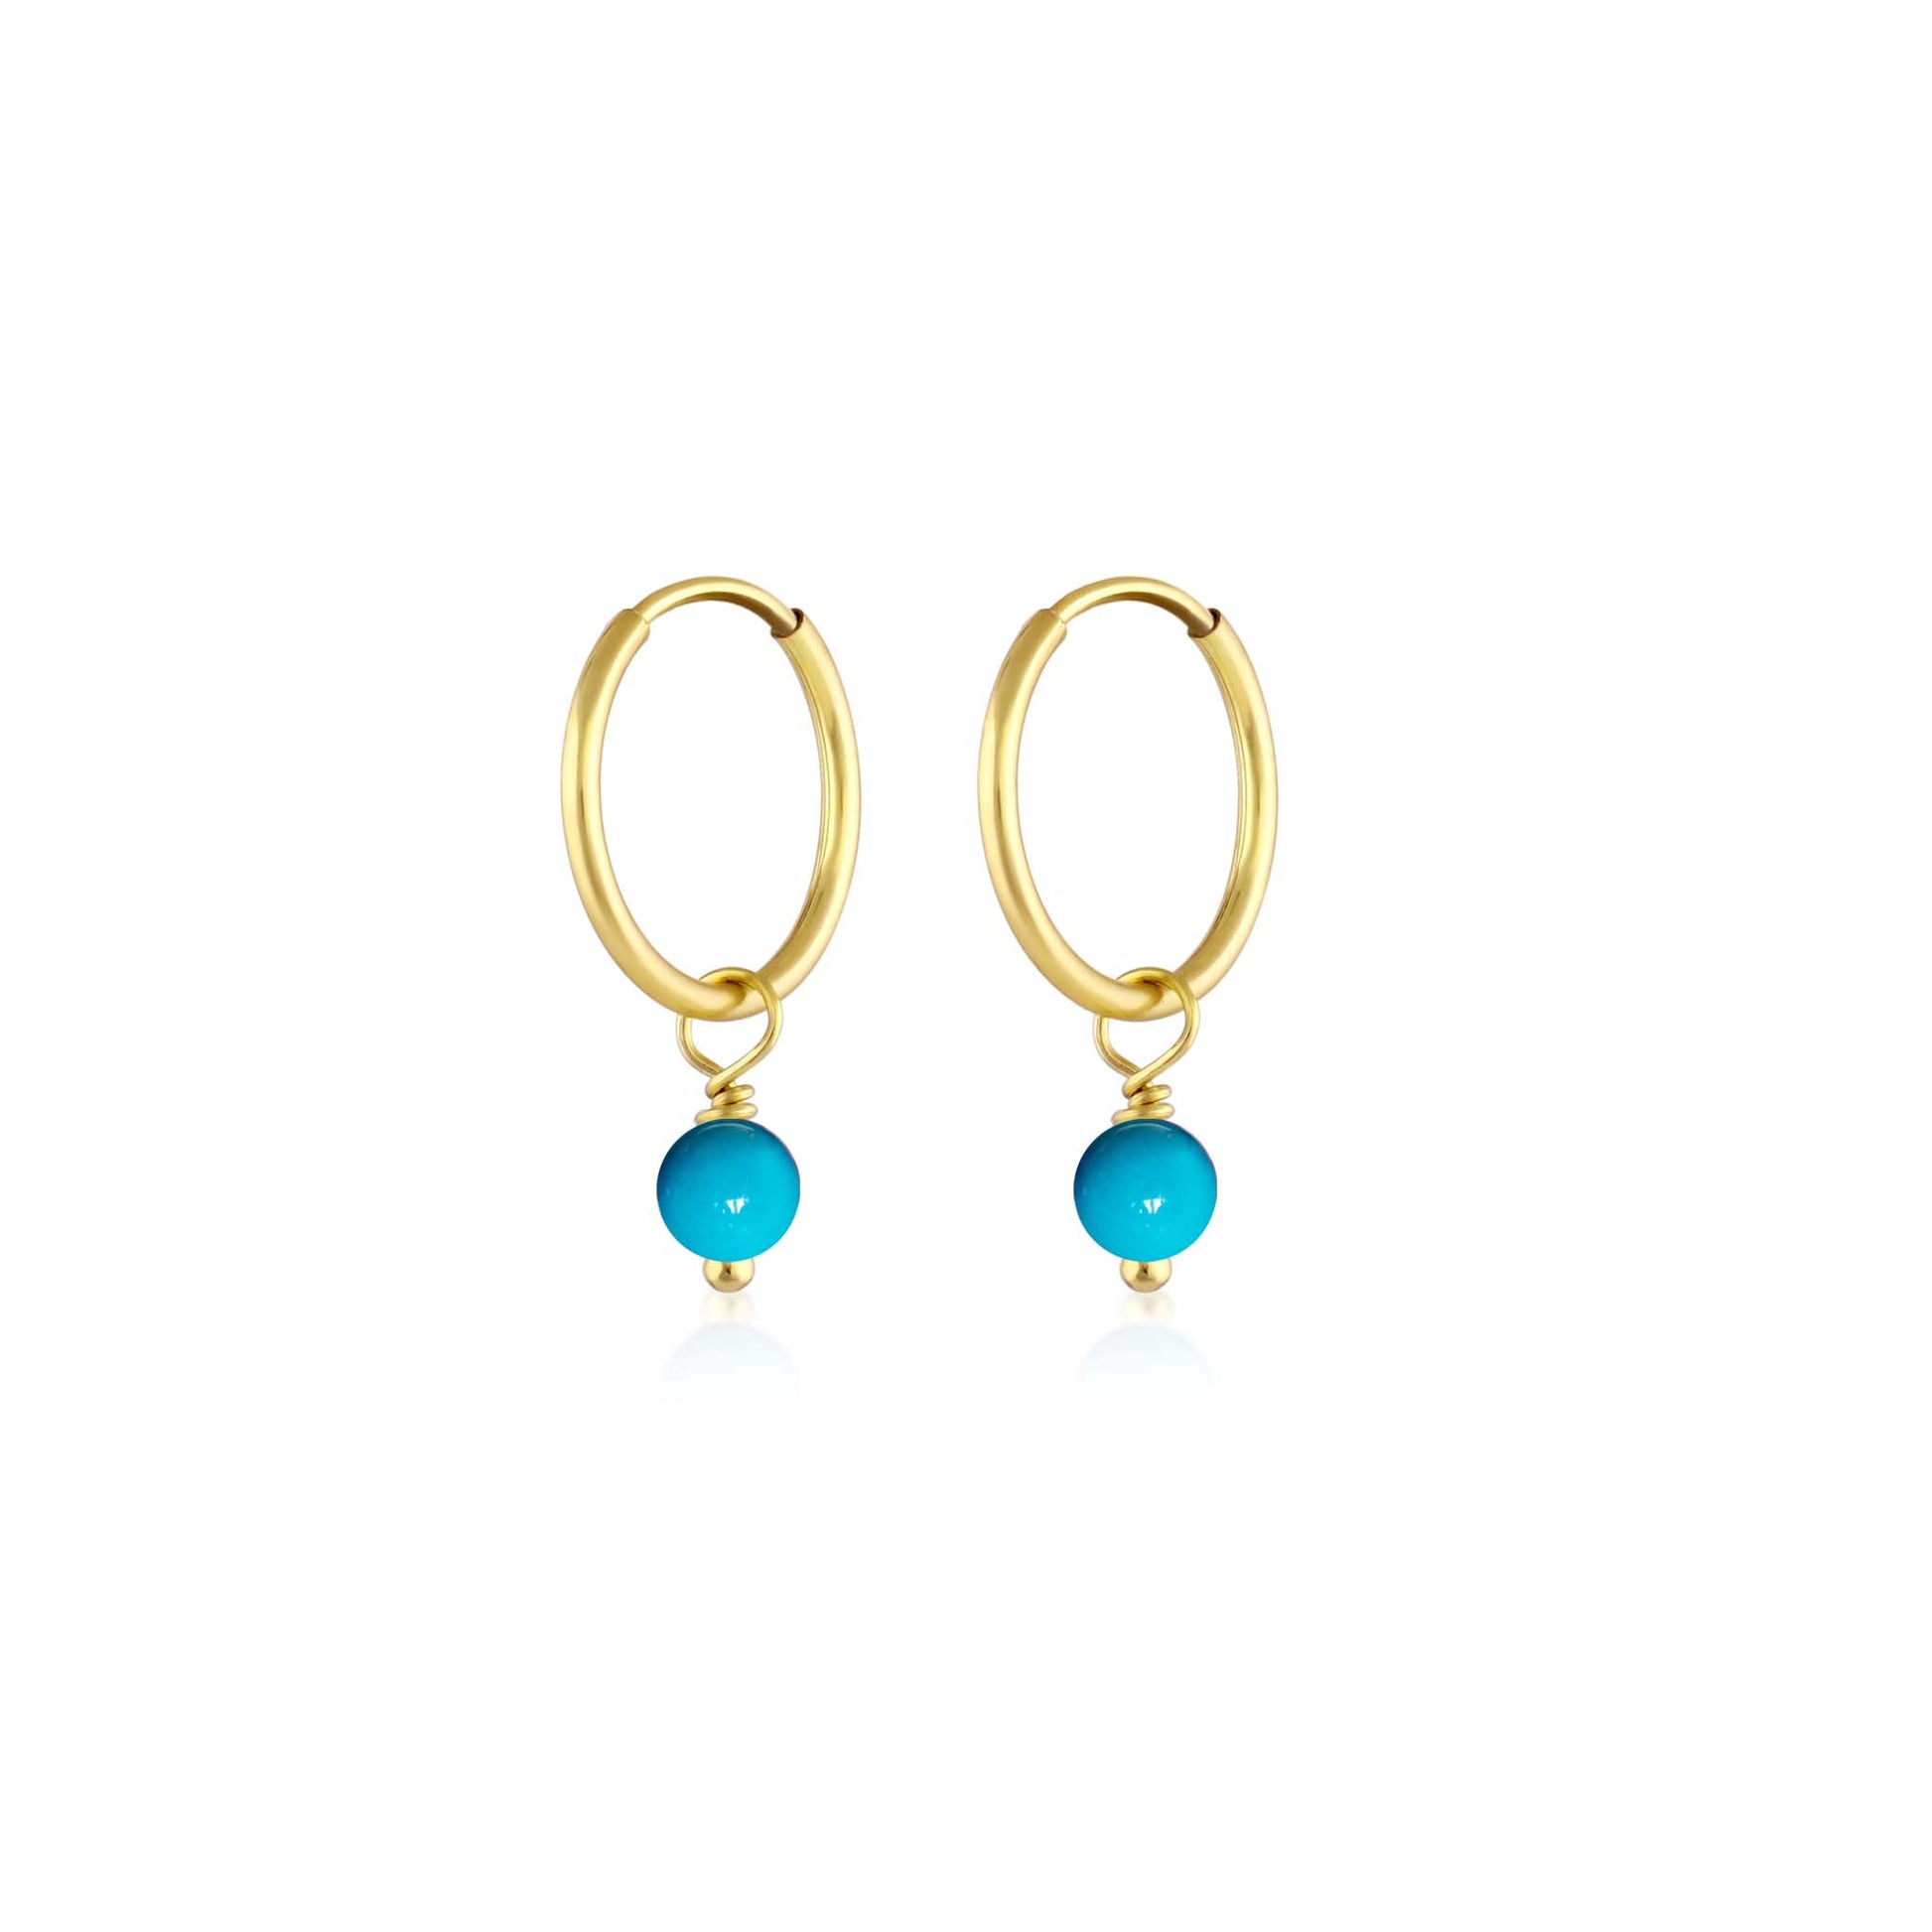 BORN TO ROCK® Jewelry | 14Kt Yellow Gold Filled Turquoise Charm Hoop Earrings | Discover our beautiful collection of hoop earrings at borntorockjewelry.com.  Shop Sterling silver or gold plated hoop earrings, earrings with natural gemstones beads, charm hoops and stud earrings. A personalized gift idea for every mom, grandma, bride, bridesmaid, daughter, wife, mother-in-law & loved one. 